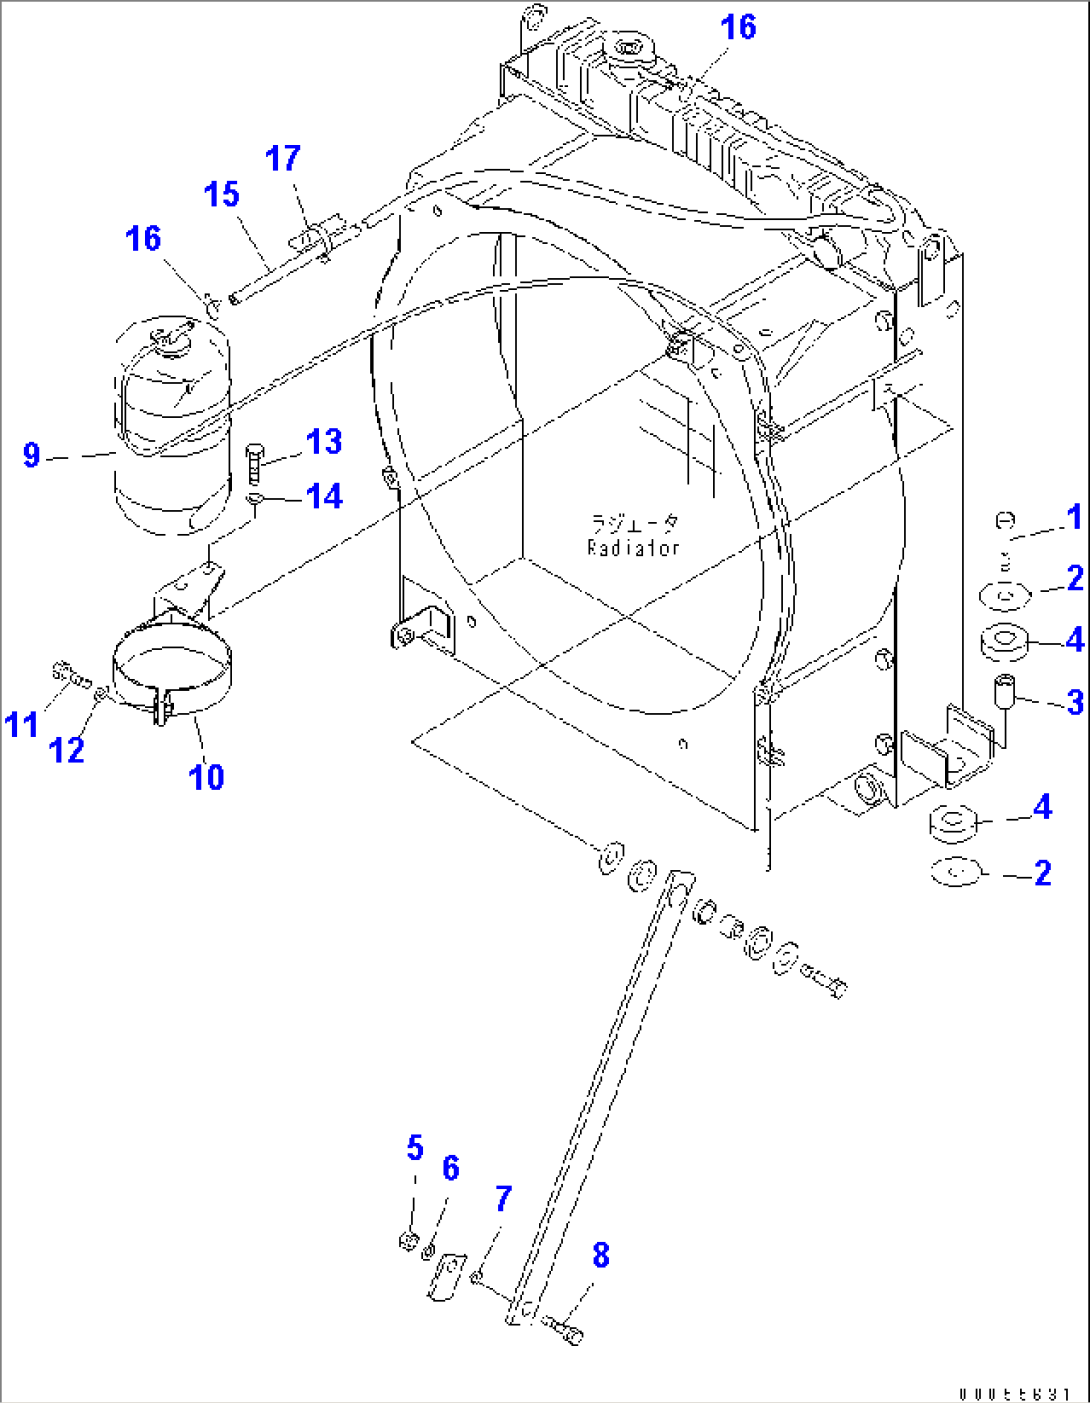 RADIATOR (RESERVE TANK¤ PIPING AND MOUNTING PARTS) (LIVESTOCK RAISING SPEC.)(#11508-)